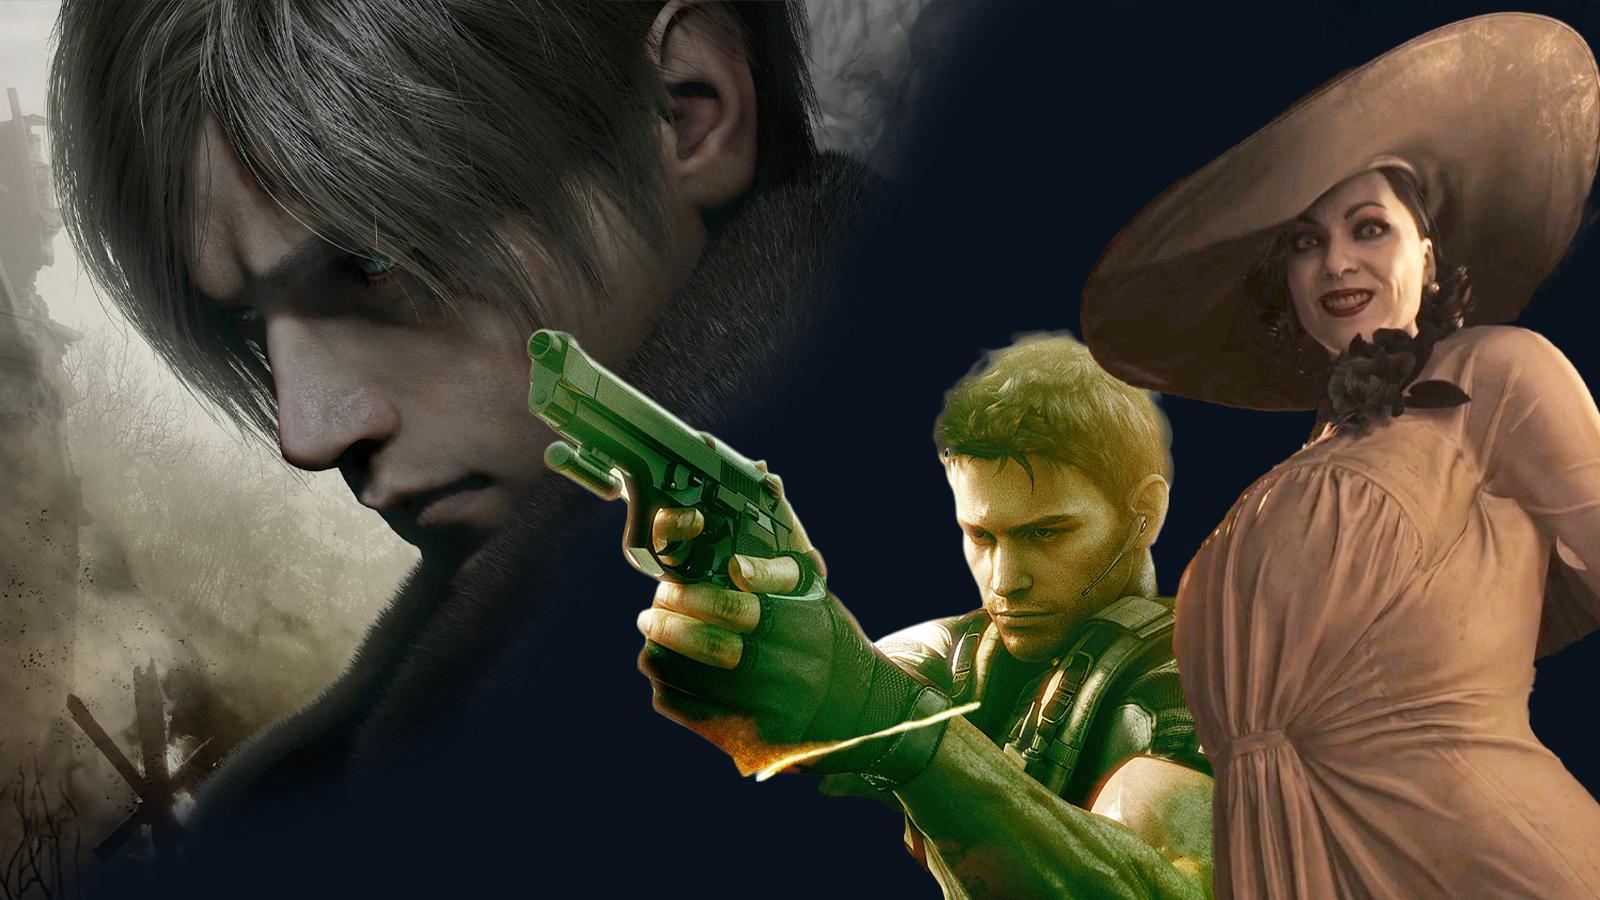 resident evil leon, chris and village villain Lady Dimitrescu in a collage